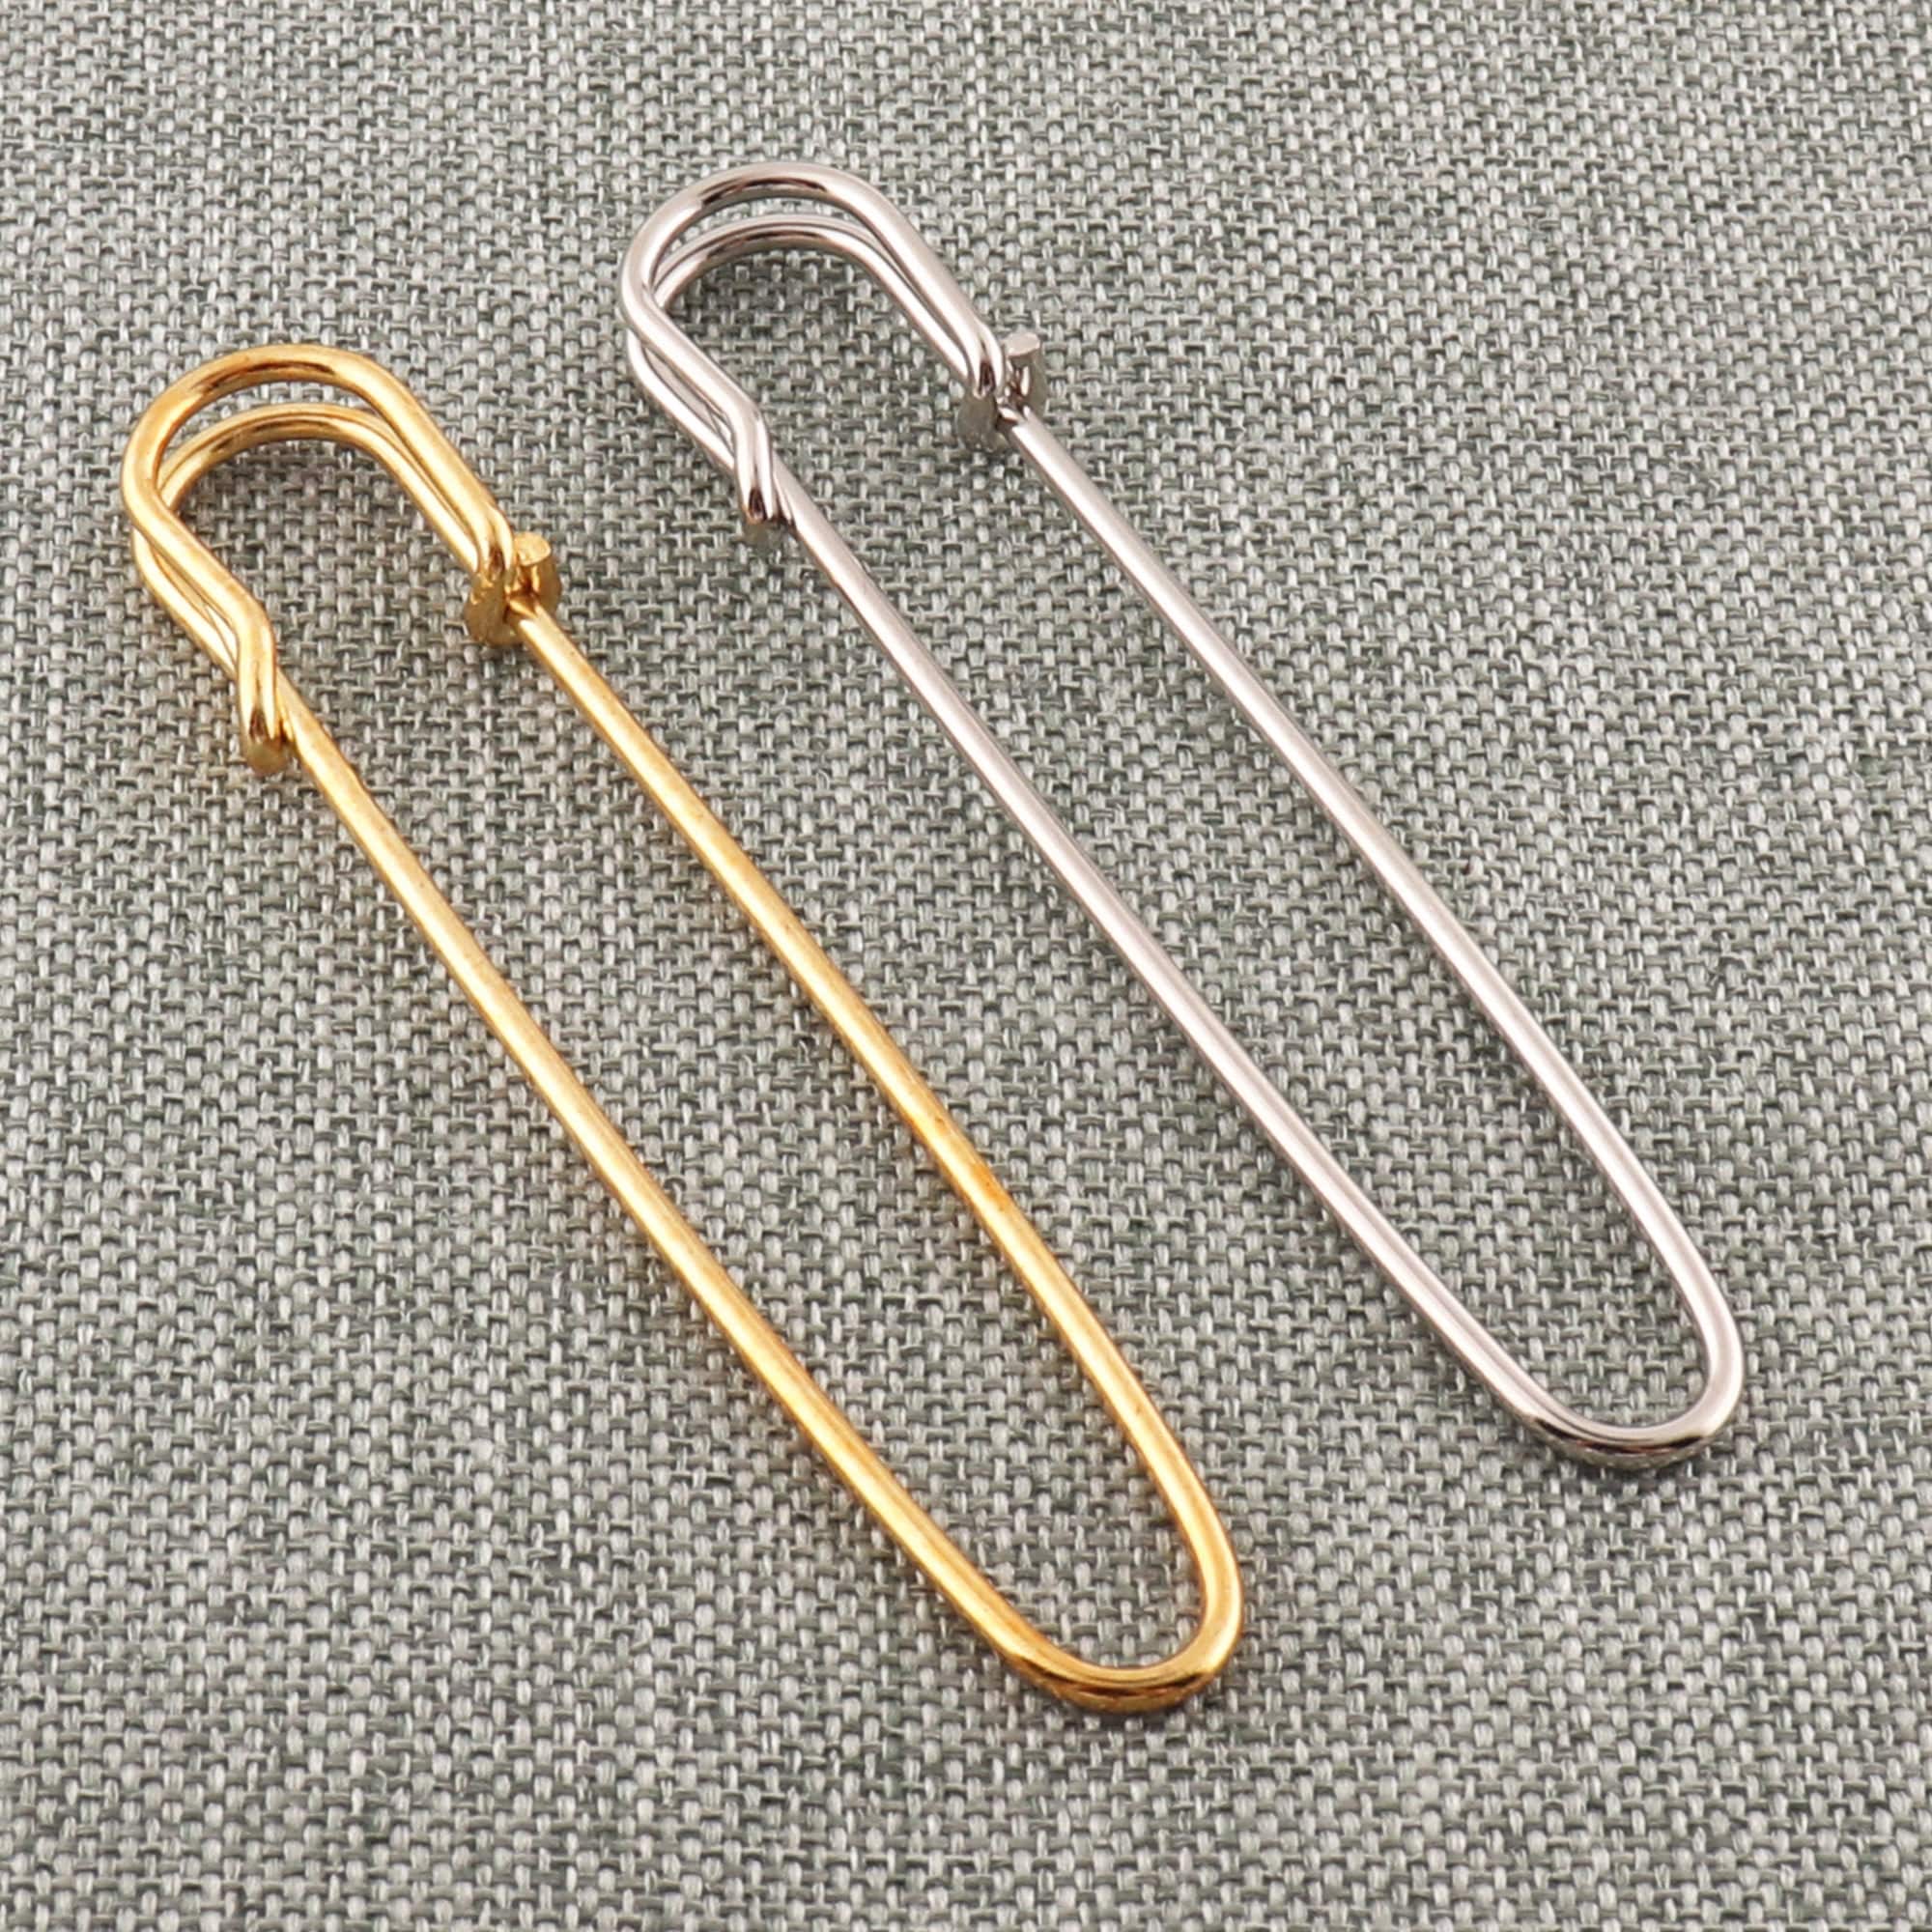 20pcs Heilwiy Large Safety Pins 4 Inch Kilt Pins Extra Large Pins Strong  Blanket Pins